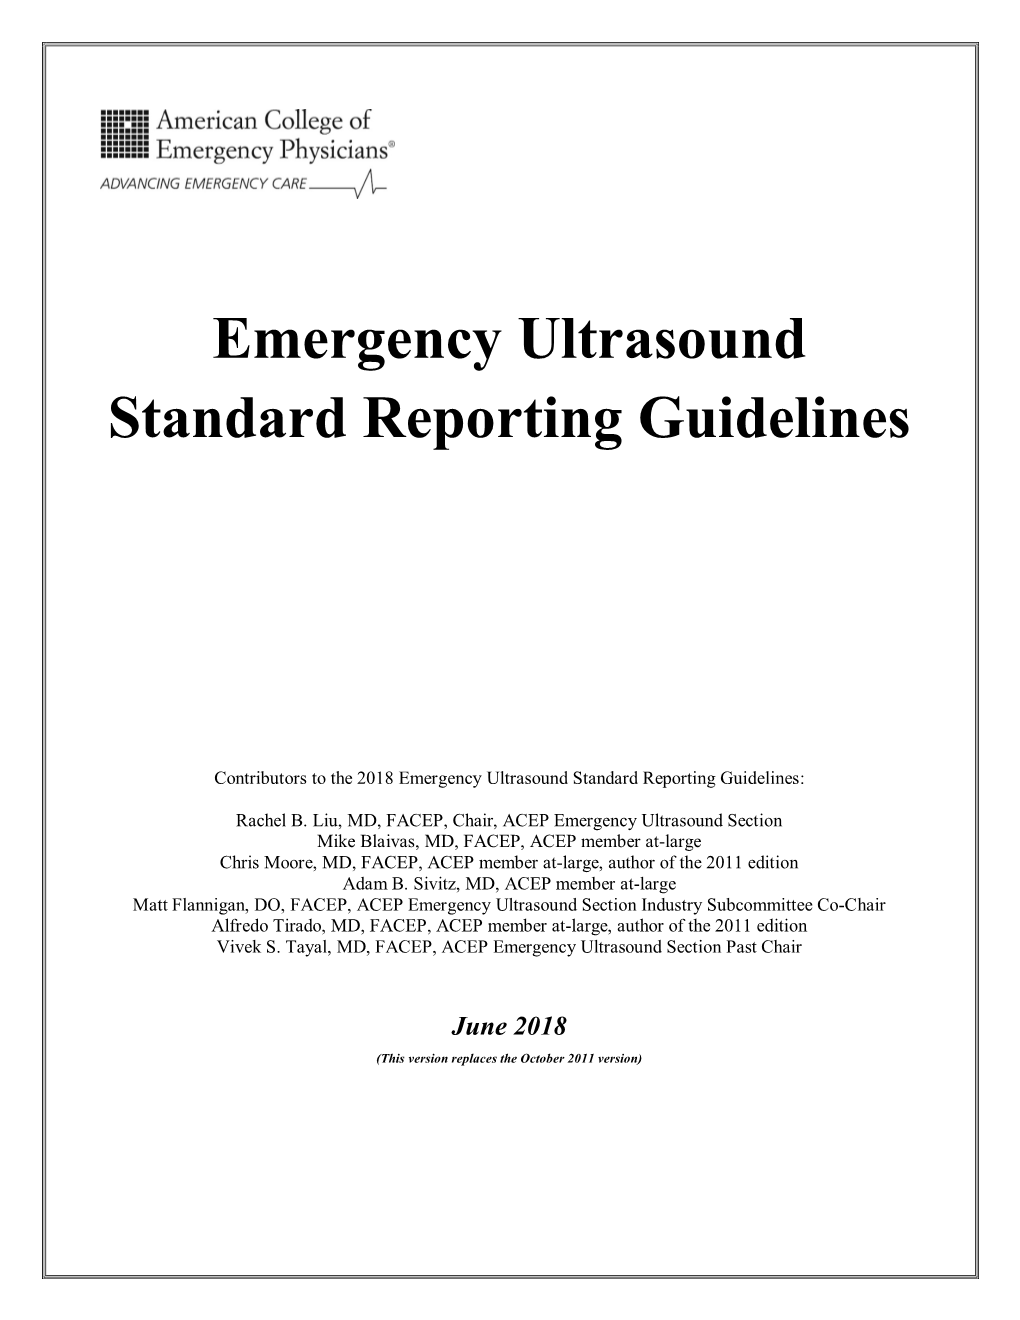 Emergency Ultrasound Standard Reporting Guidelines